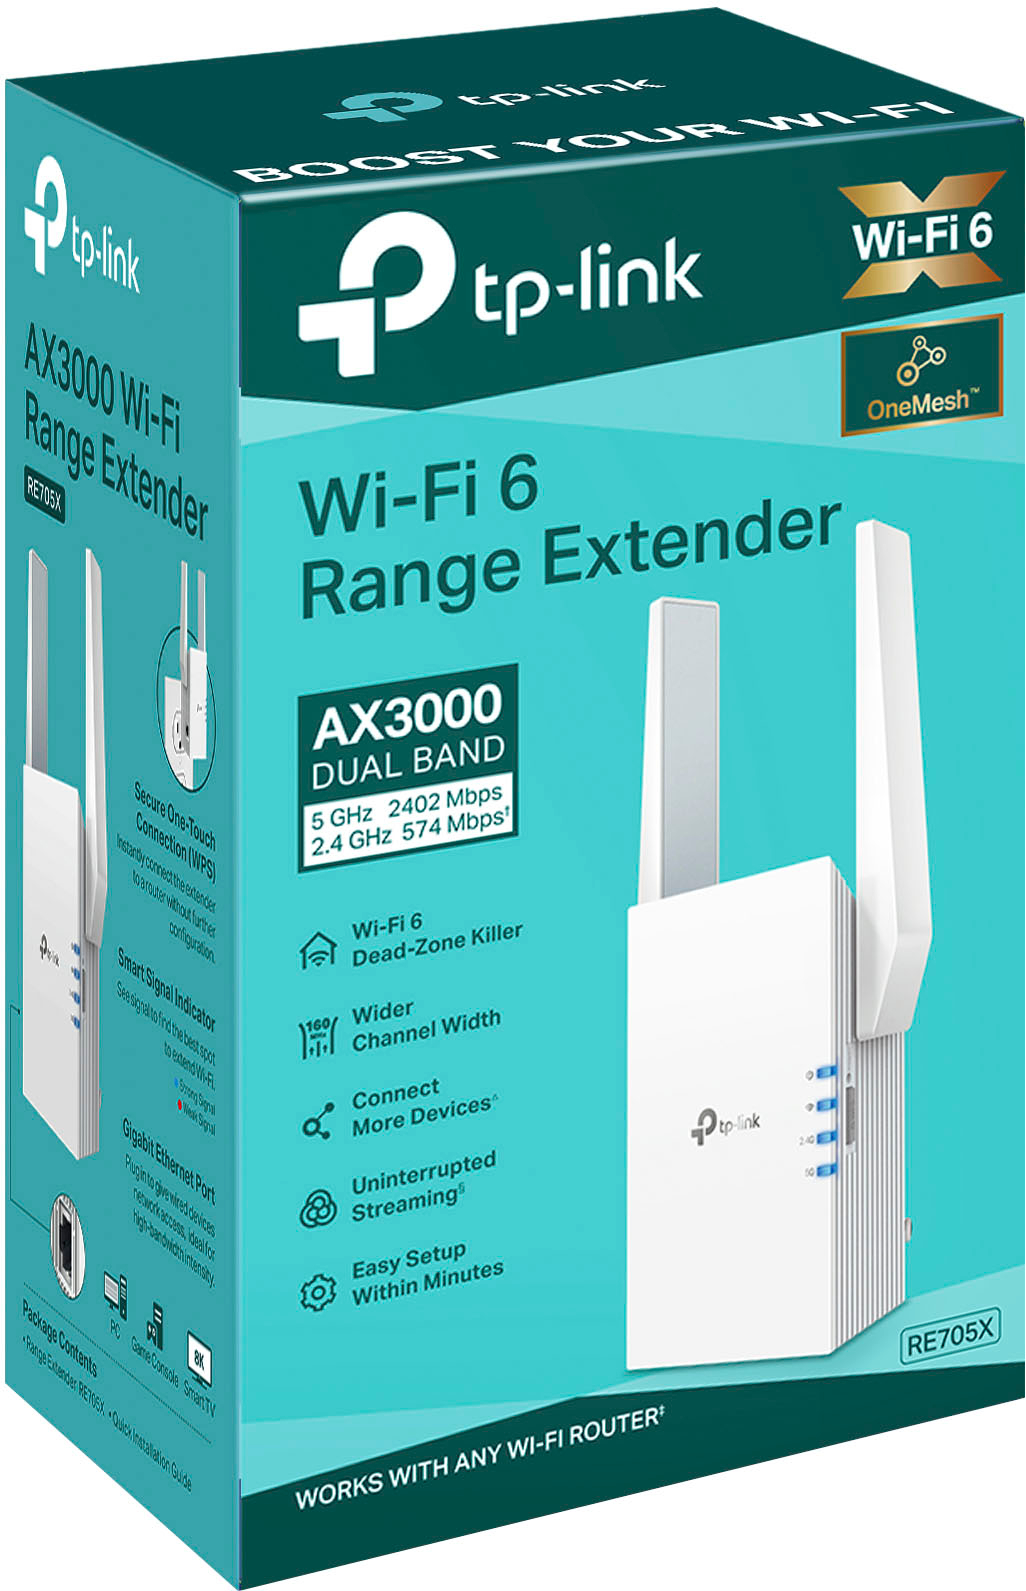 Mos streng Reflectie TP-Link AX3000 Dual-Band Wi-Fi 6 Range Extender White RE705X - Best Buy